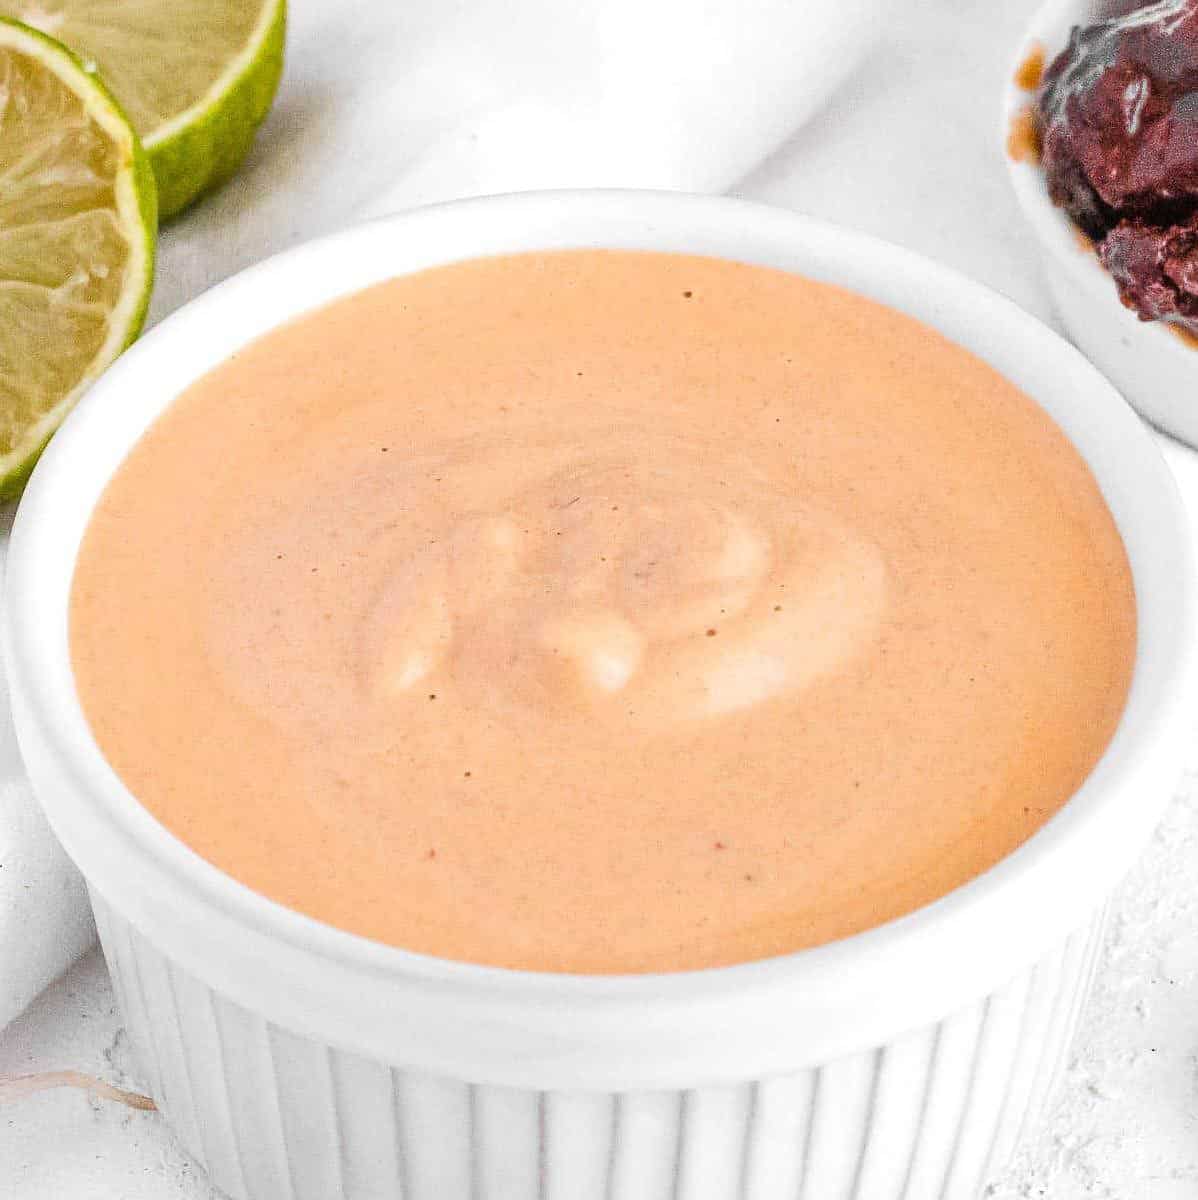  This chipotle sauce packs a punch without being too overpowering.